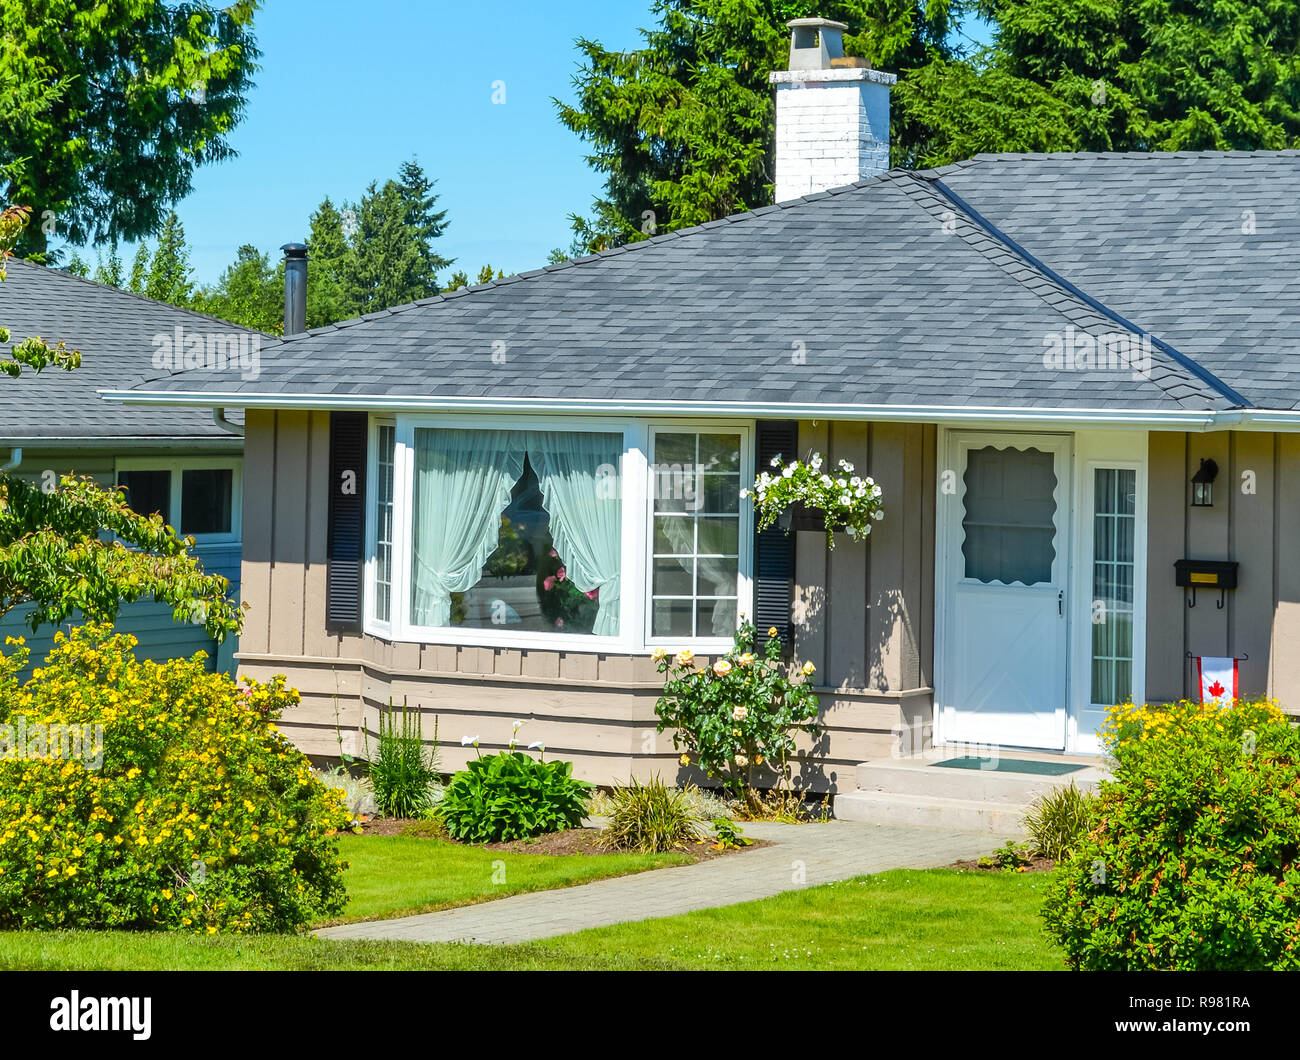 Nice family house on a sunny day in Vancouver, Canada Stock Photo - Alamy